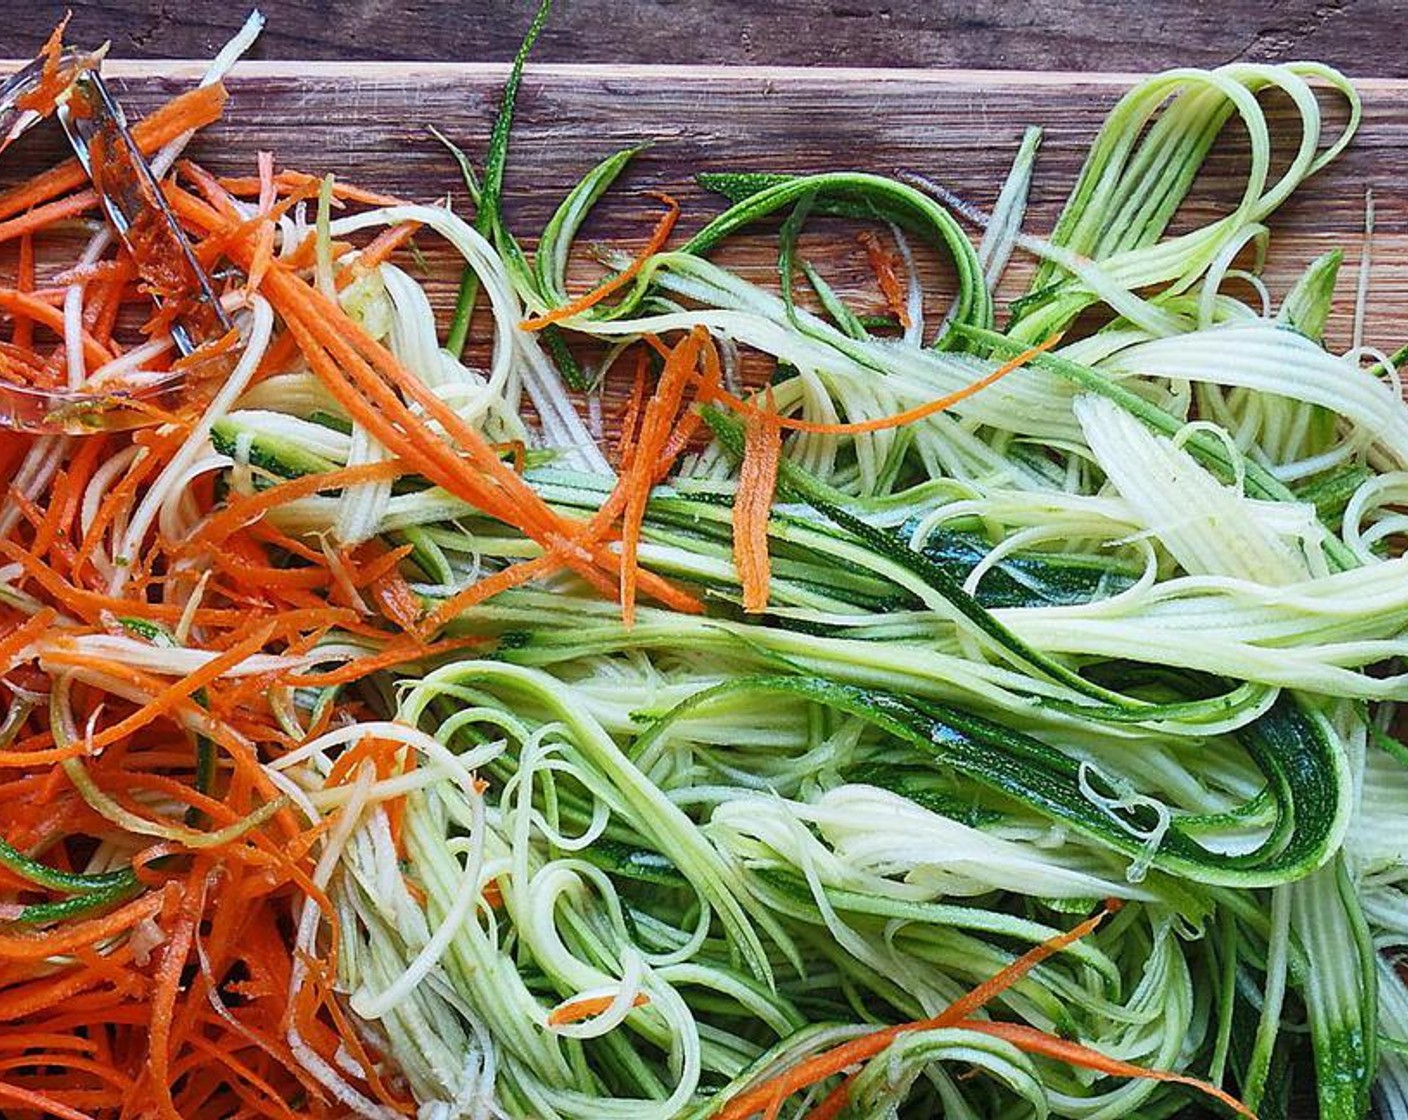 step 1 Using a Julienne peeler or Zoodle machine, make noodles from the Carrots (4) and Zucchini (4). Set aside with the Bean Sprouts (1 2/3 cups), Edamame (1/2 cup) and whatever else you are making.